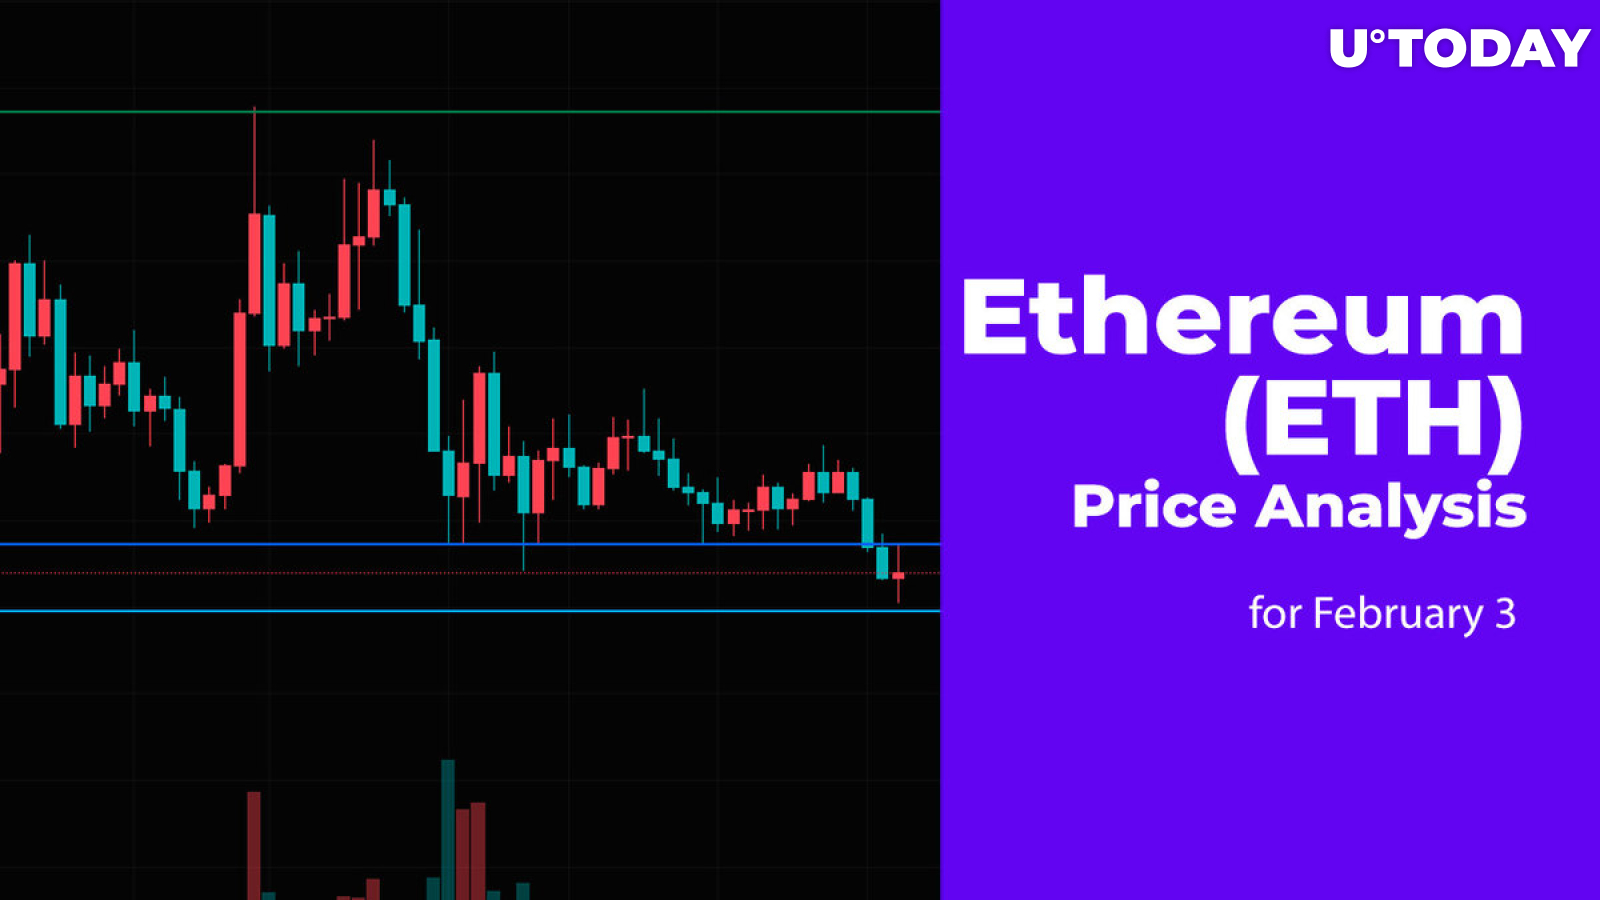 Ethereum (ETH) Price Analysis for February 3